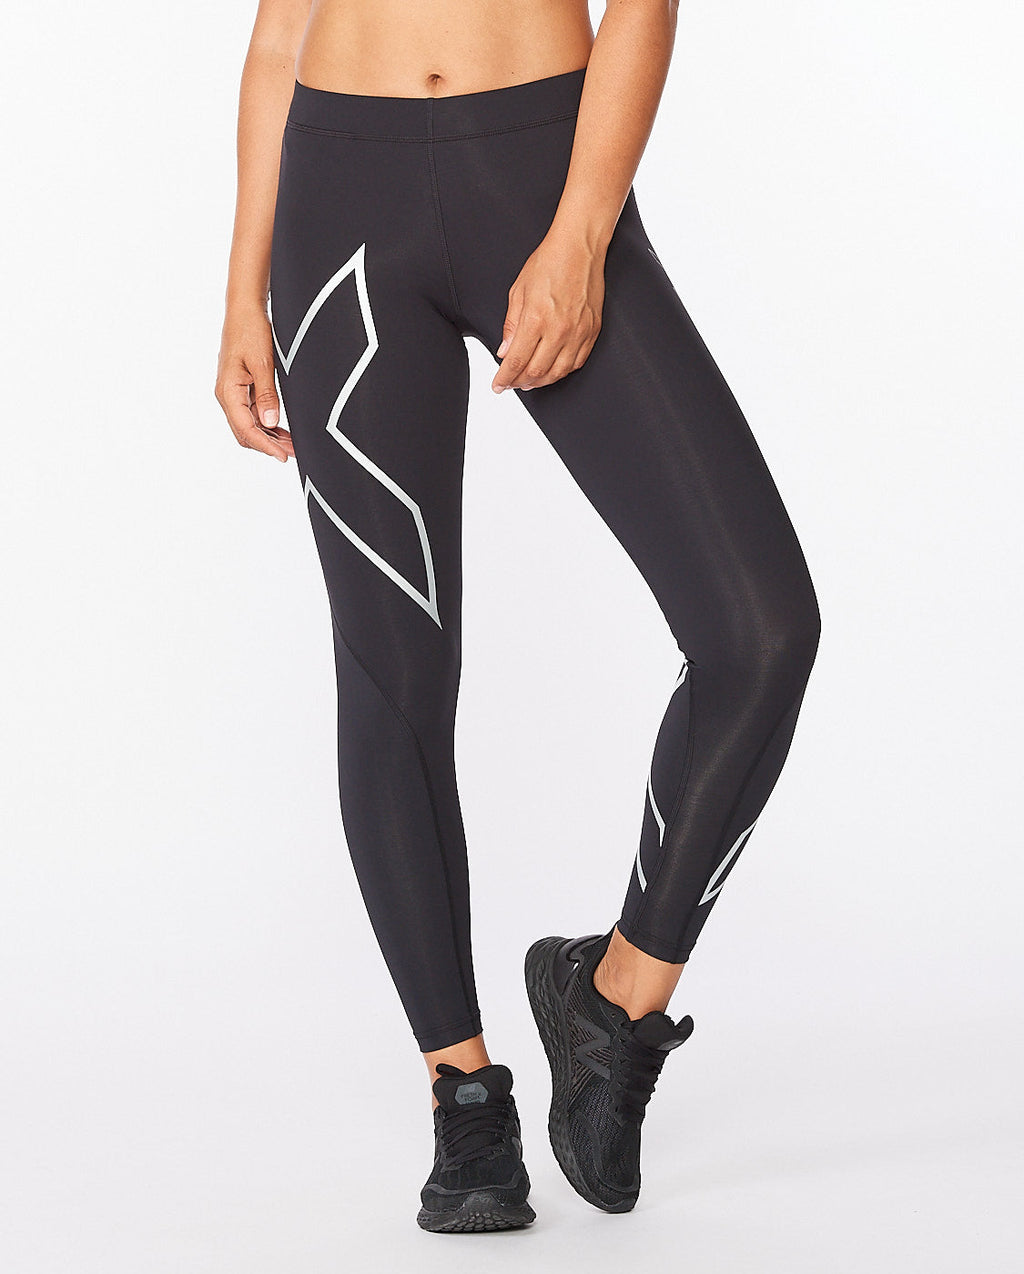 Overlegenhed Optøjer mager Core Compression Tights Dame – 2XU